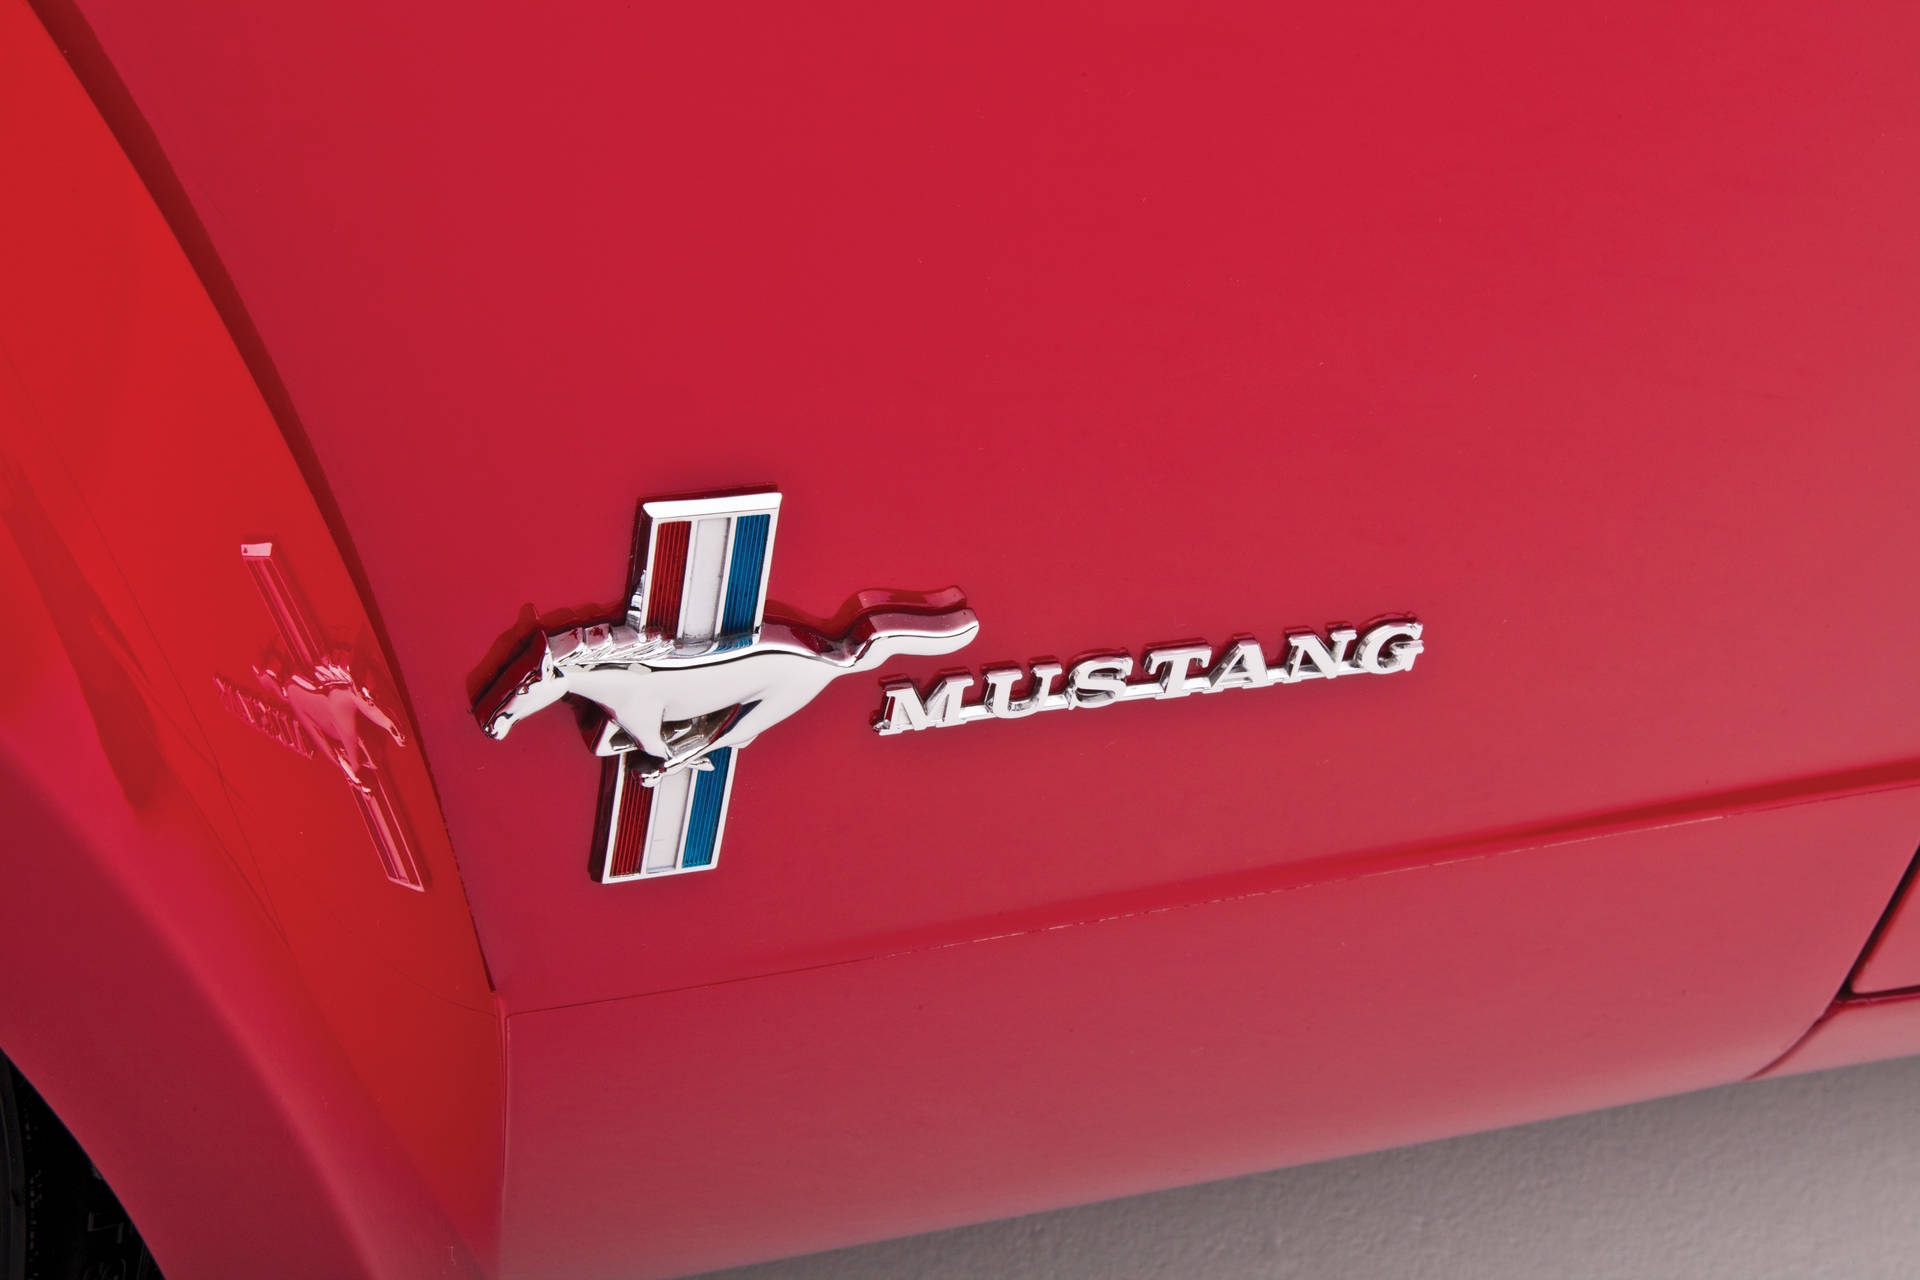 Mustang Hd Zoomed-in Logo Background